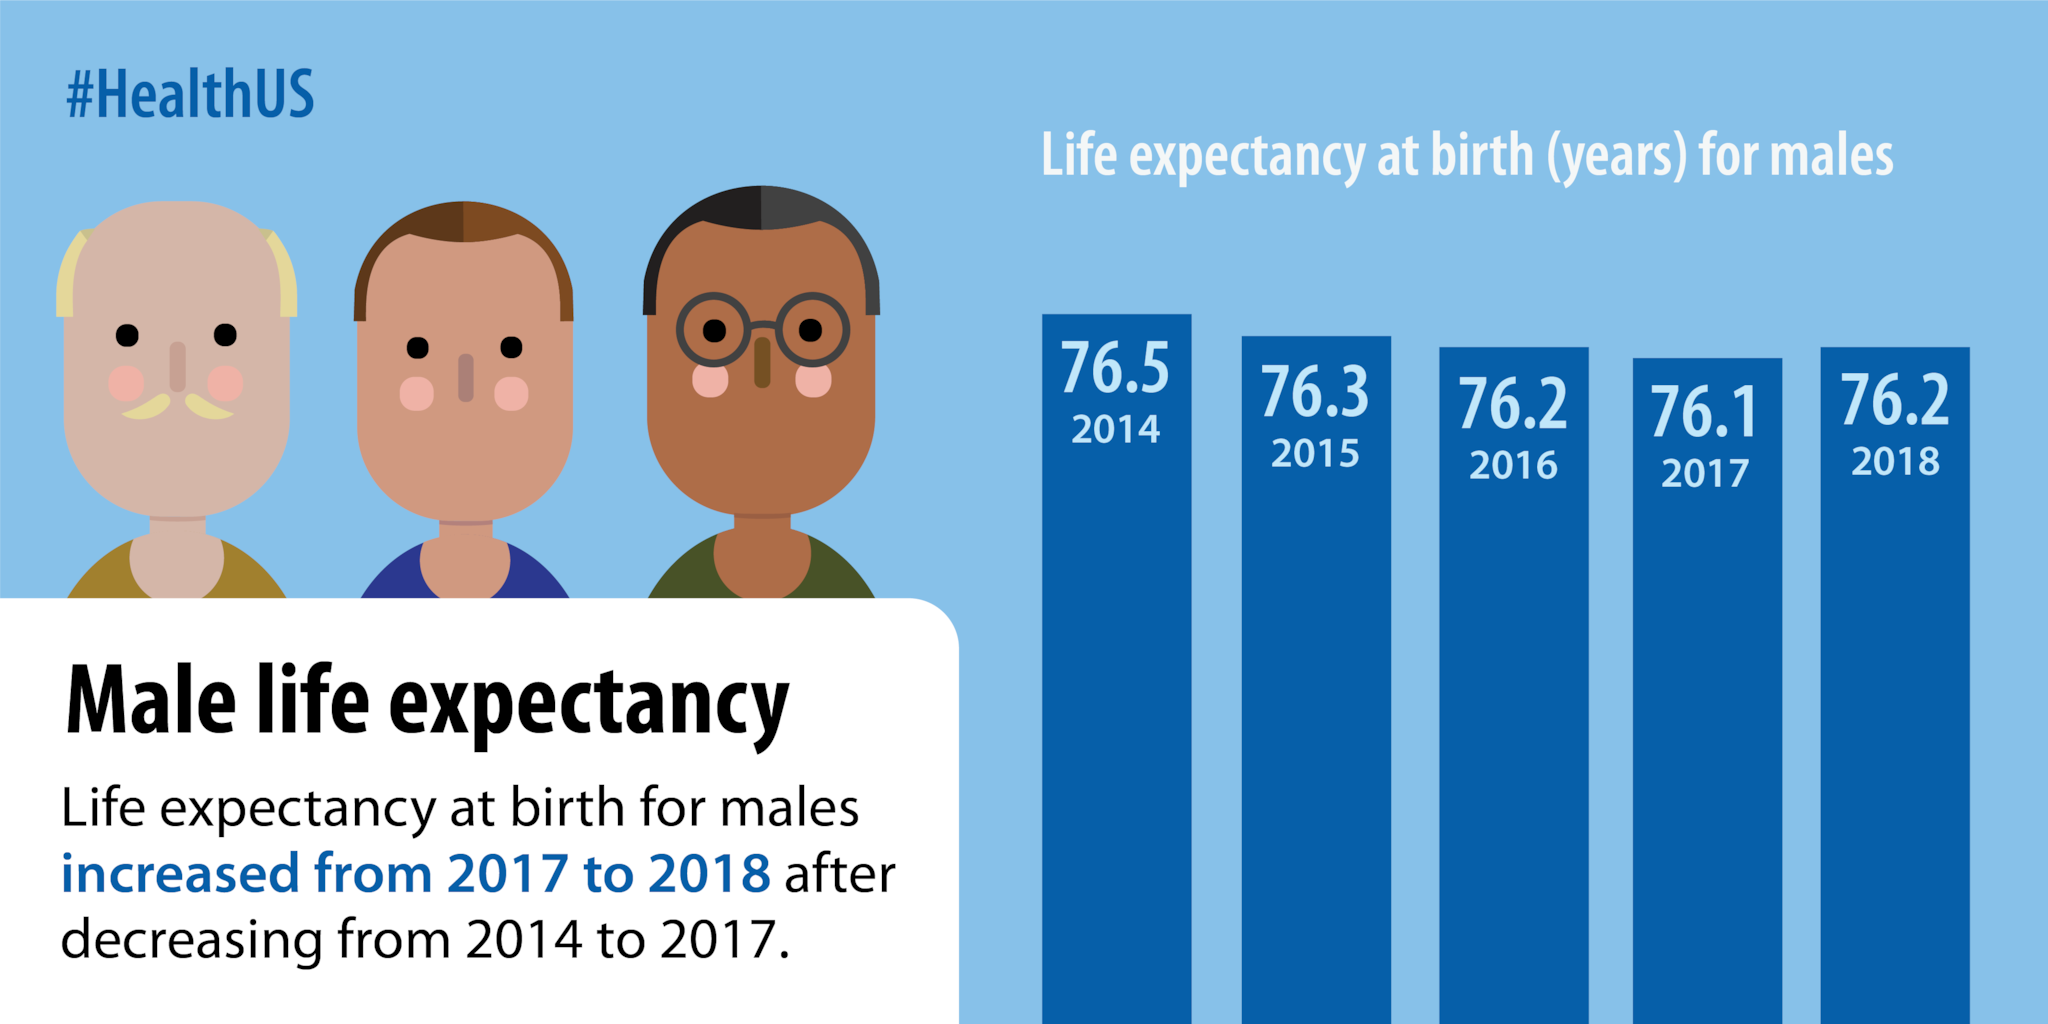 Life expectancy at birth for males increased from 2017 to 2018 after decreasing from 2014 to 2017.